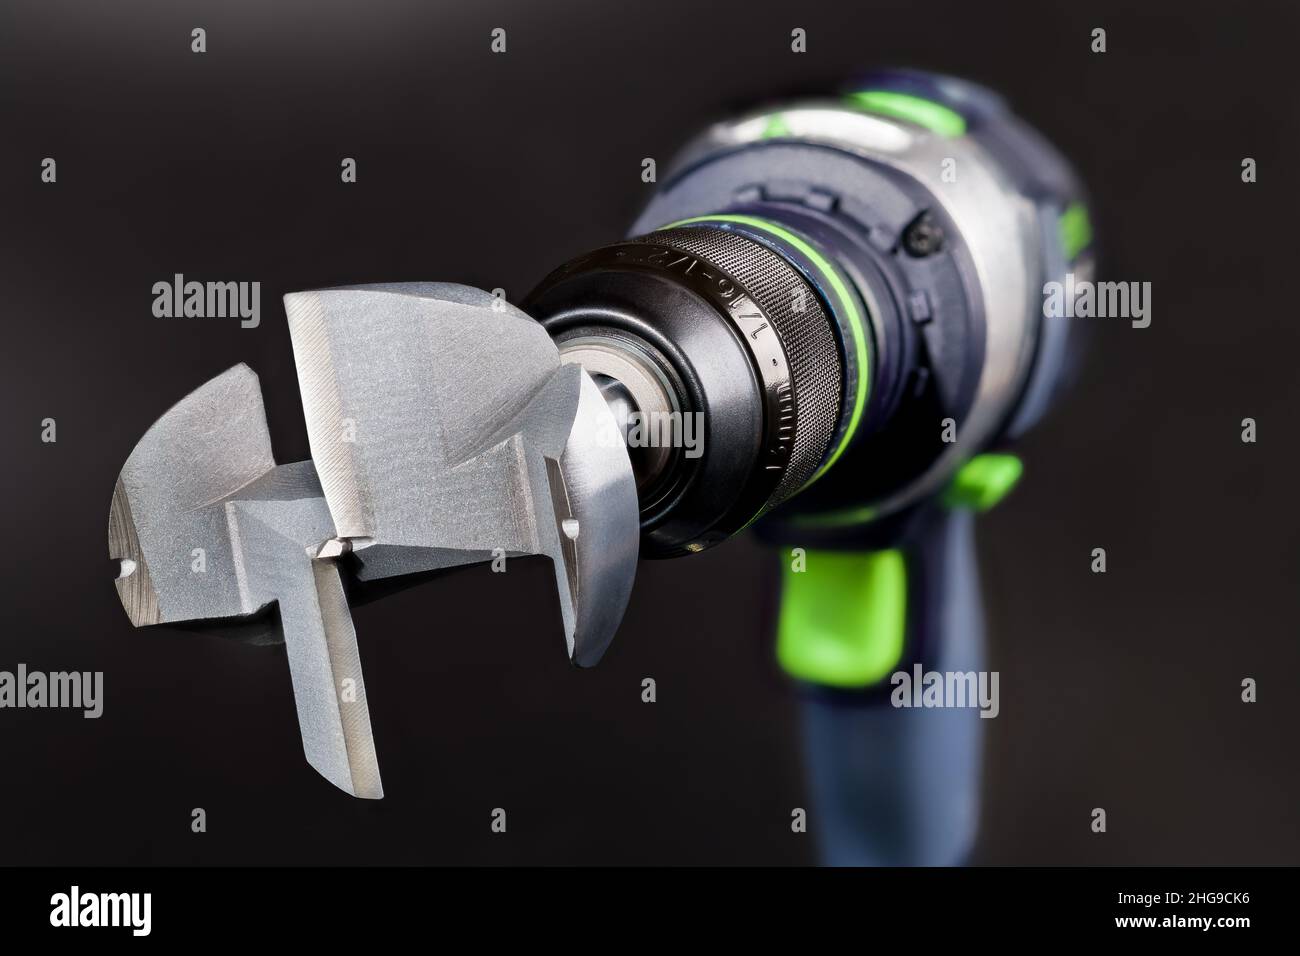 Steel Forstner bit in cordless drill on a black background. Metal professional cutting tool for boring flat bottomed holes in wood. Drilling  machine. Stock Photo